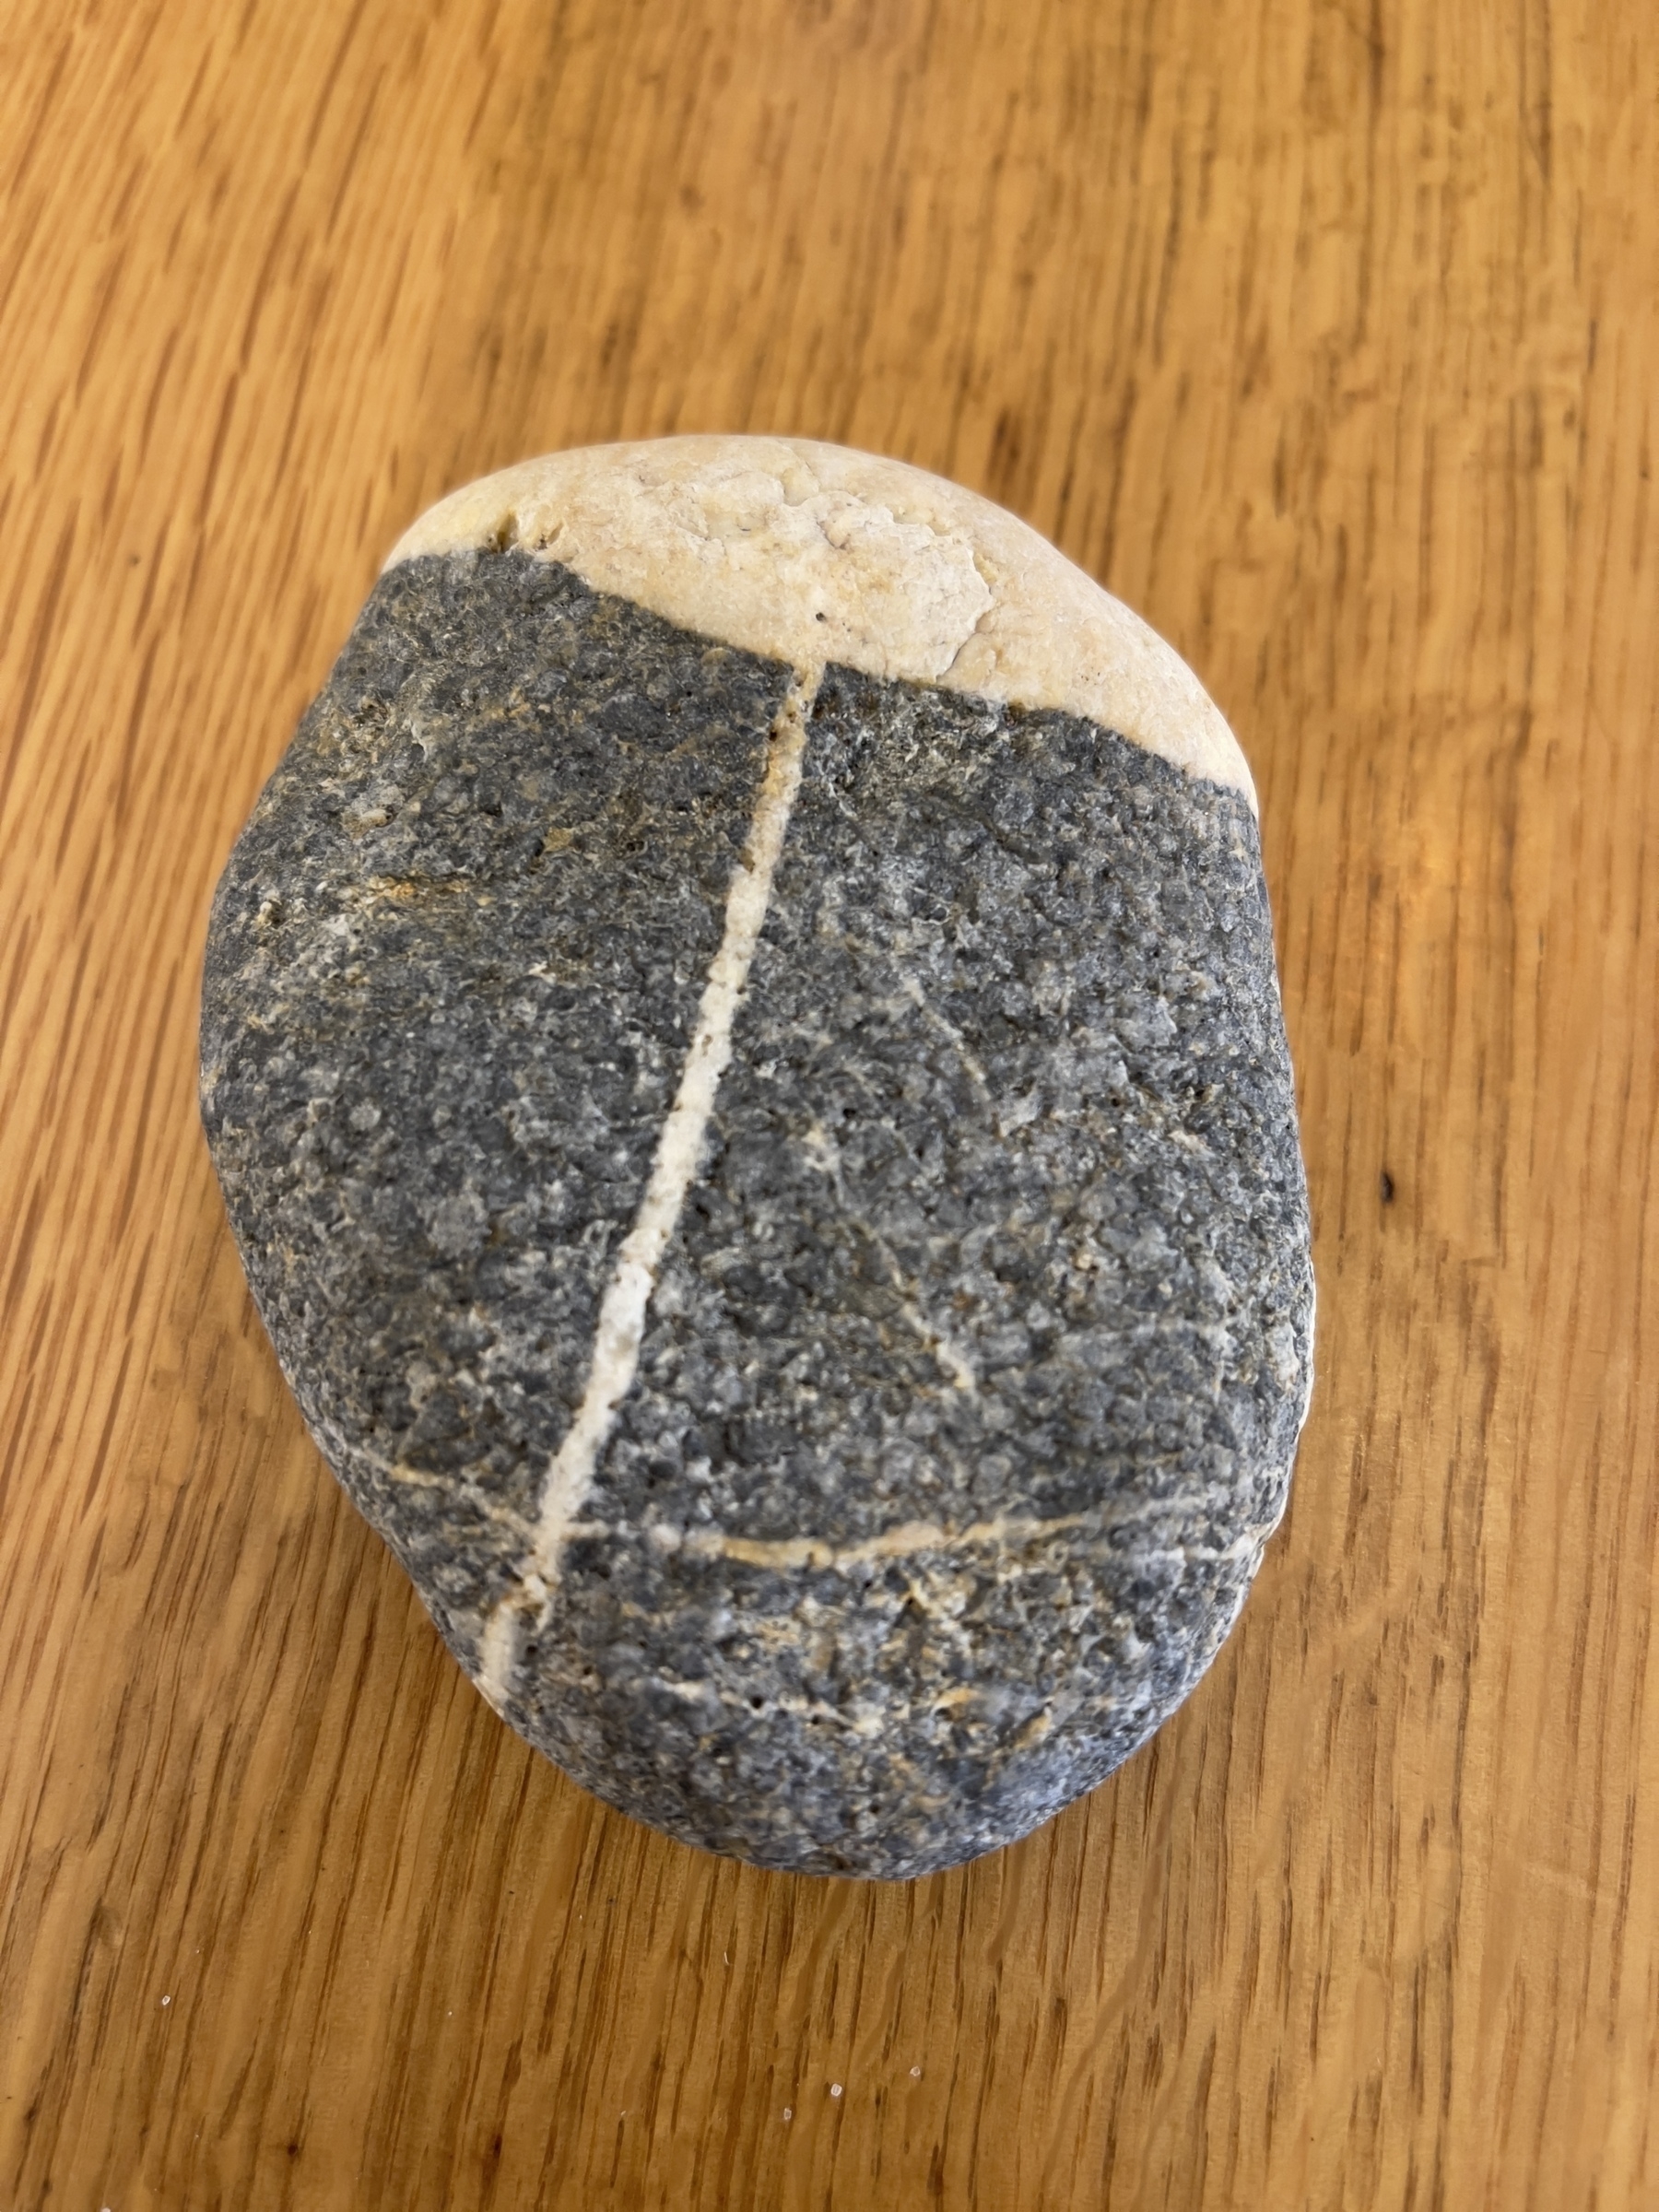 Smooth rounded two tone rock from the beach.